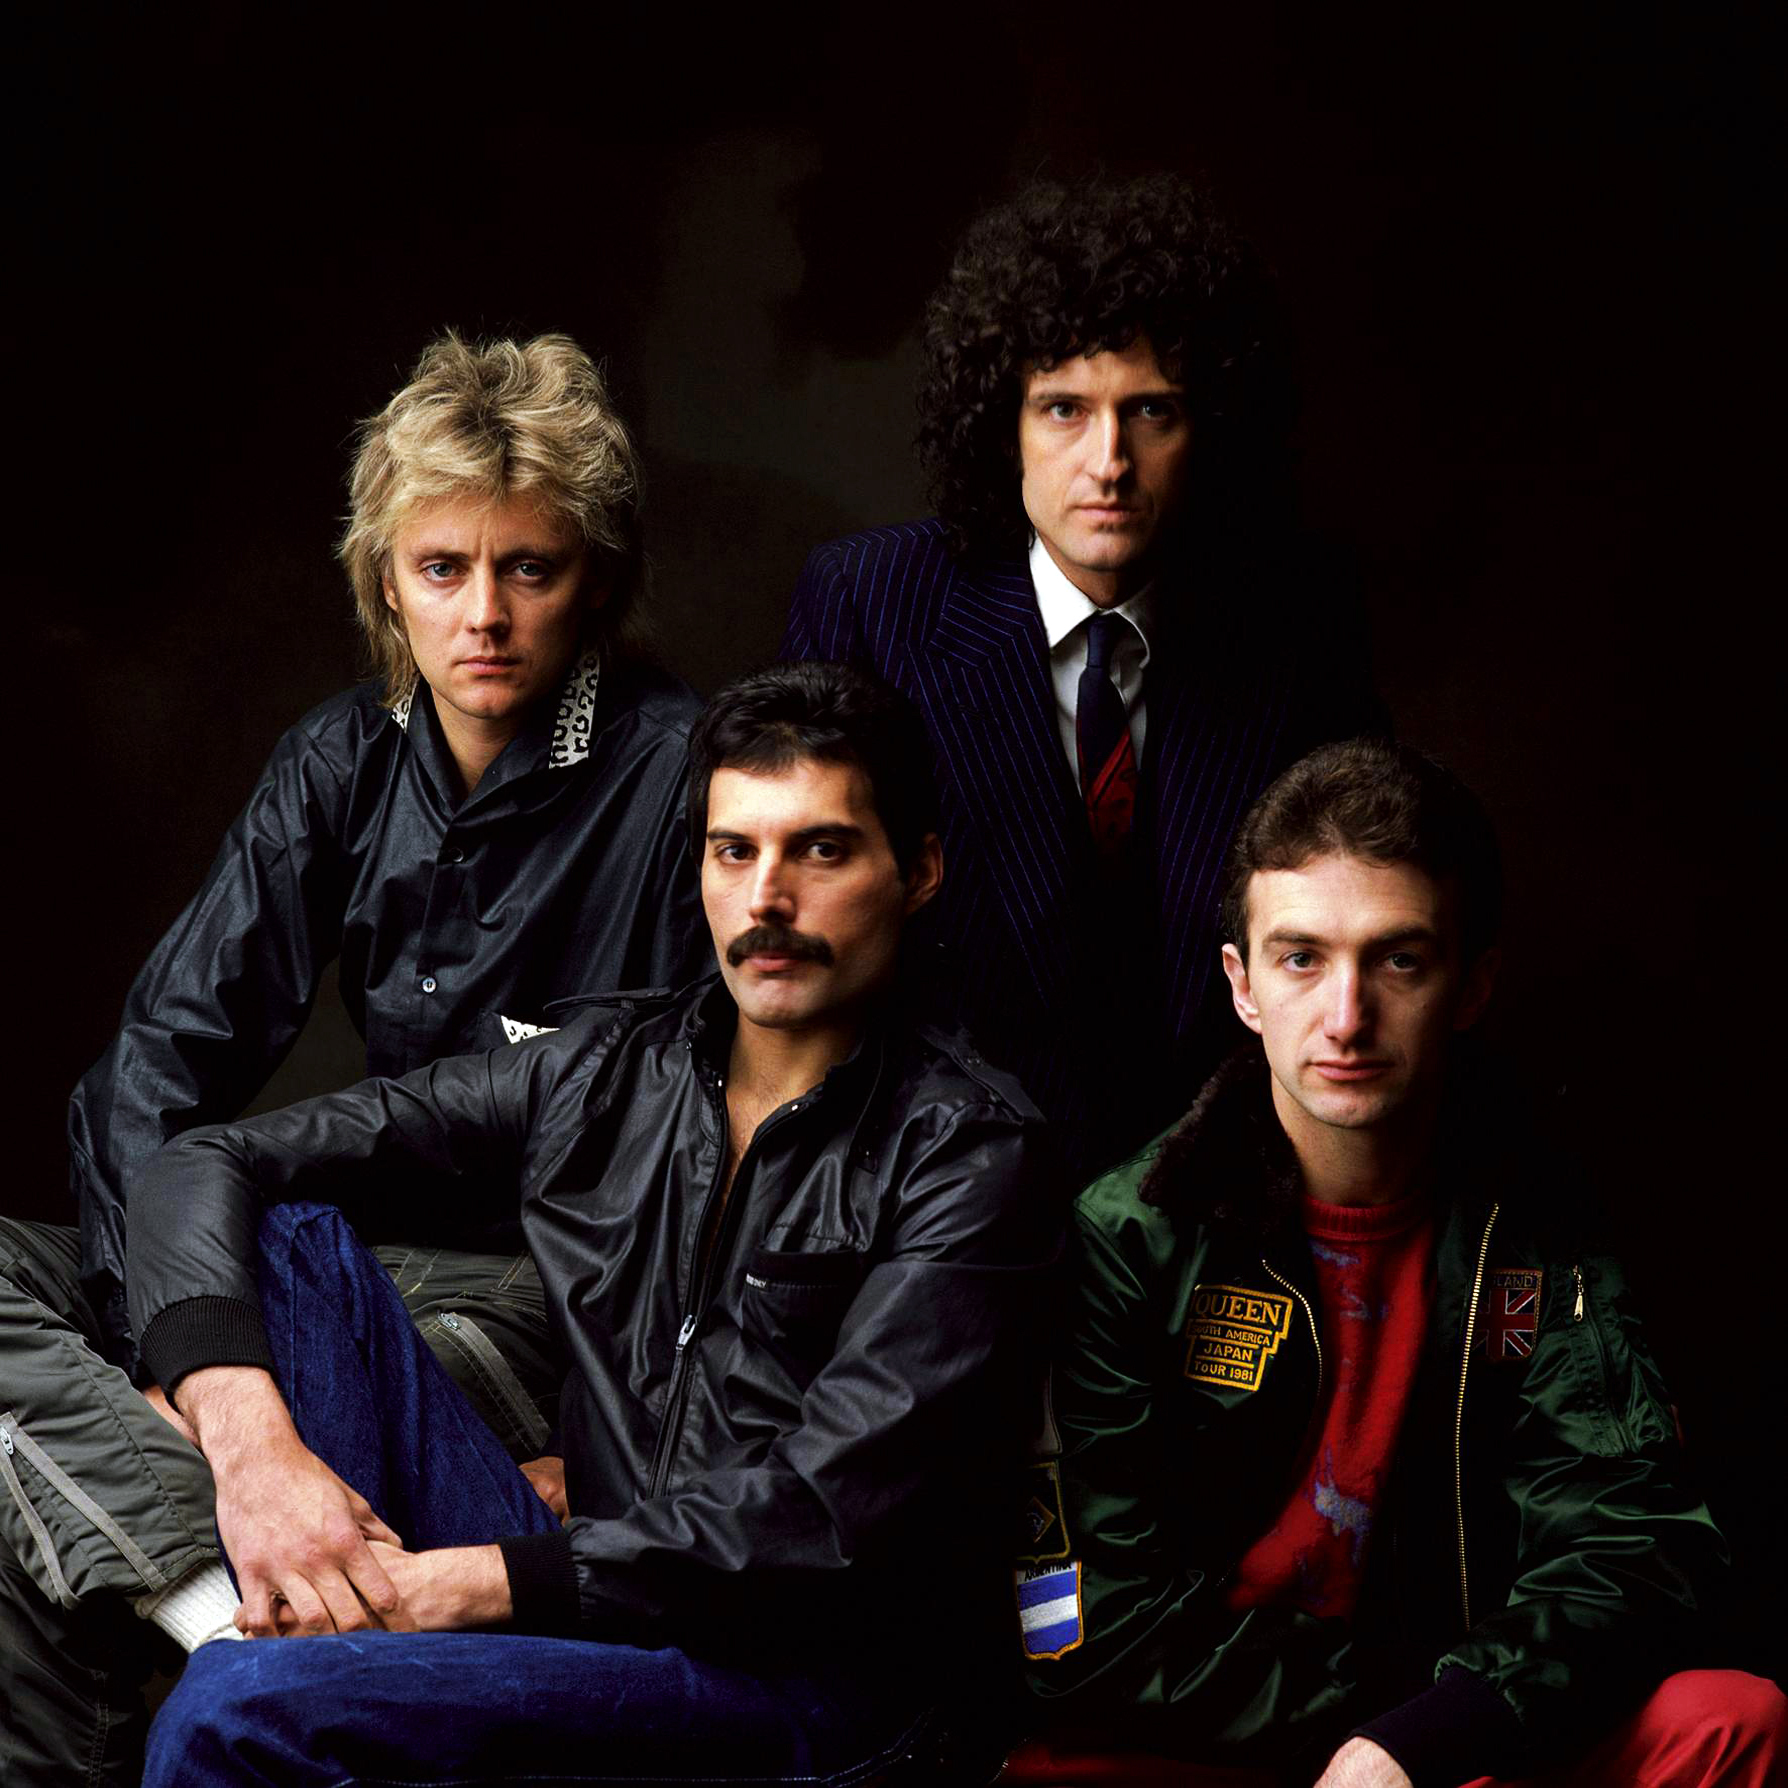 Who are the members of Queen and who took over from Freddie